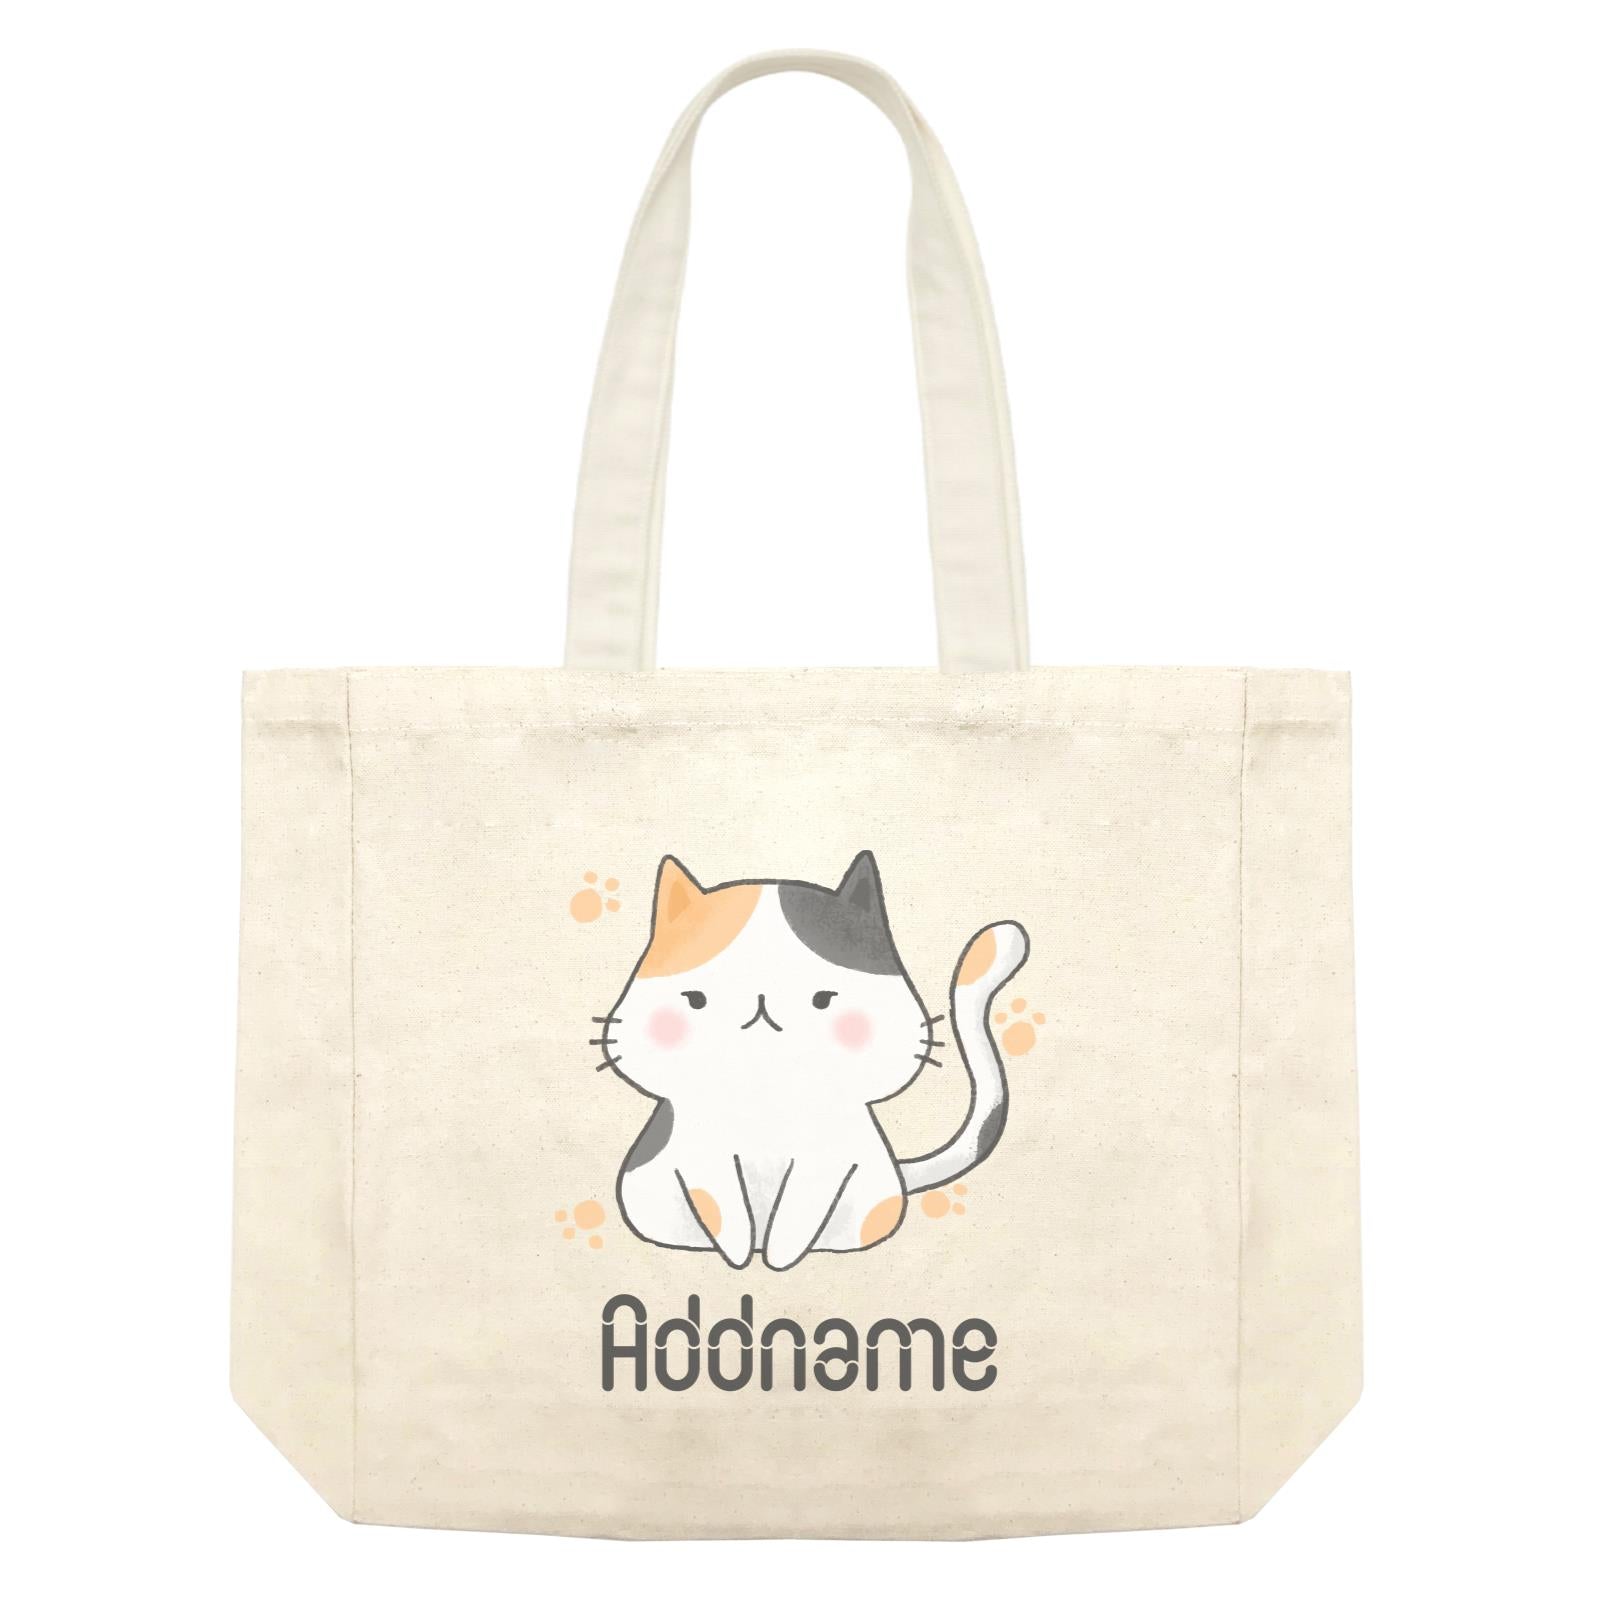 Cute Hand Drawn Style Cat Addname Shopping Bag